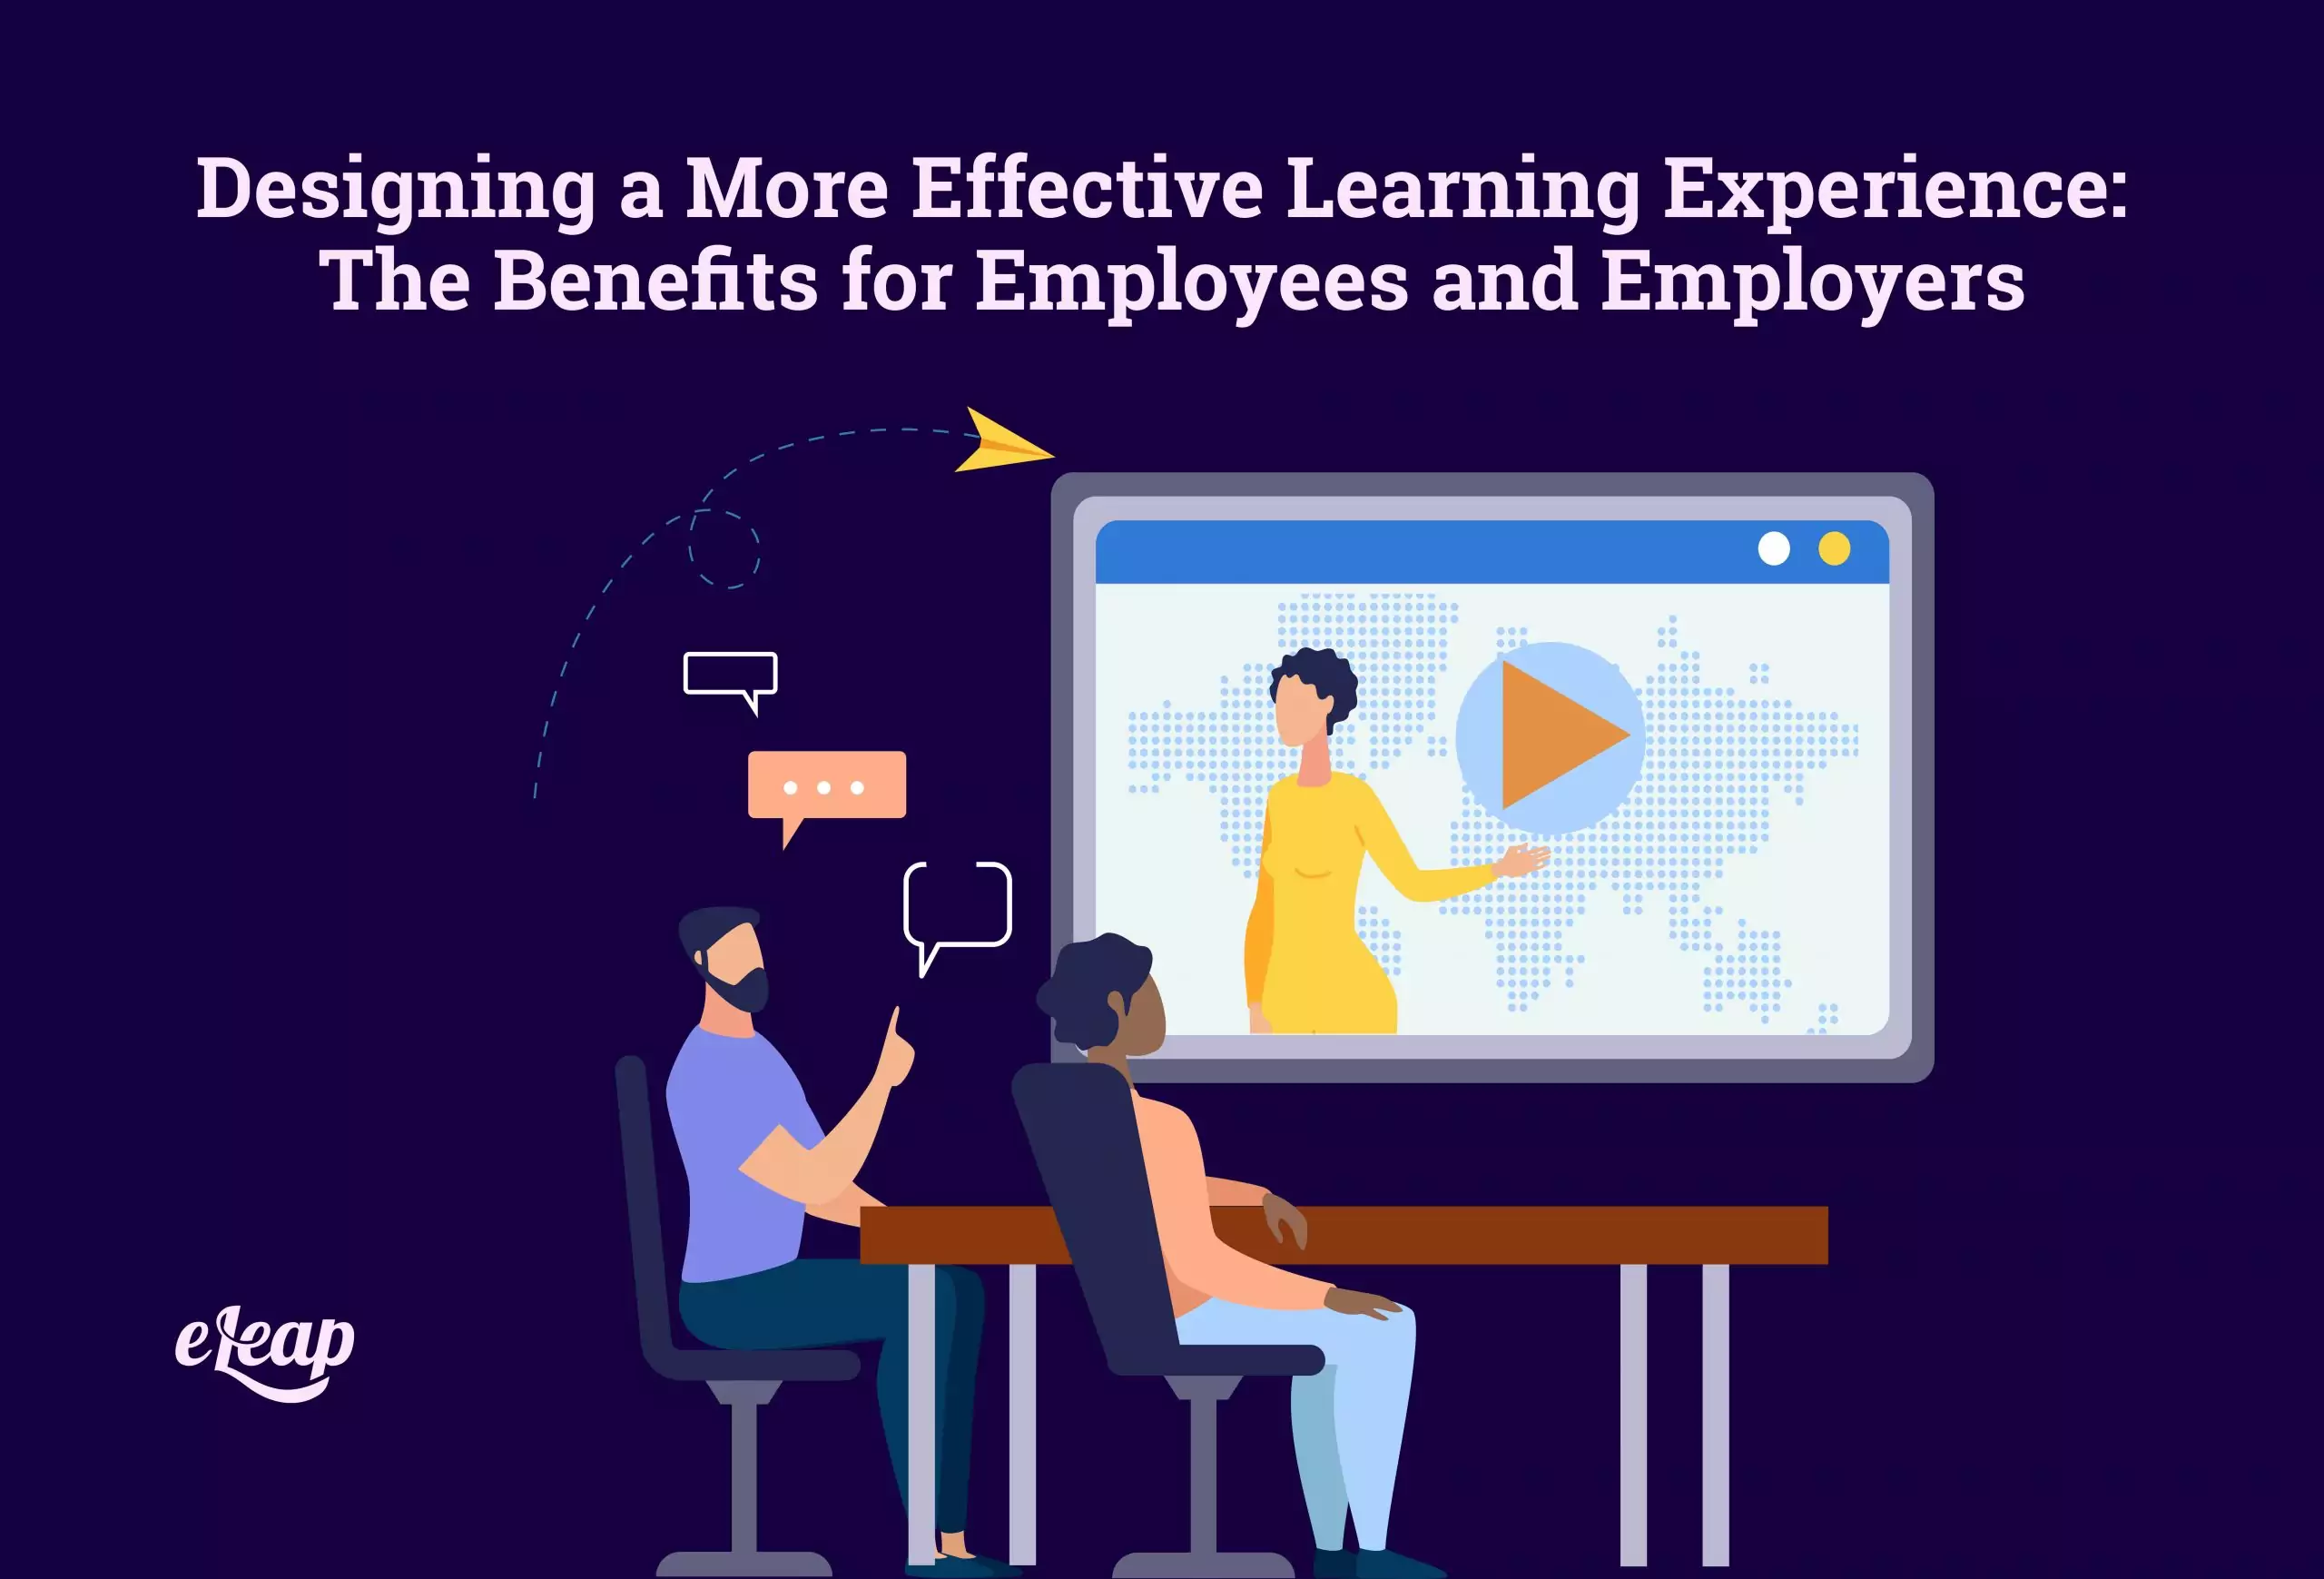 Designing a More Effective Learning Experience: The Benefits for Employees and Employers